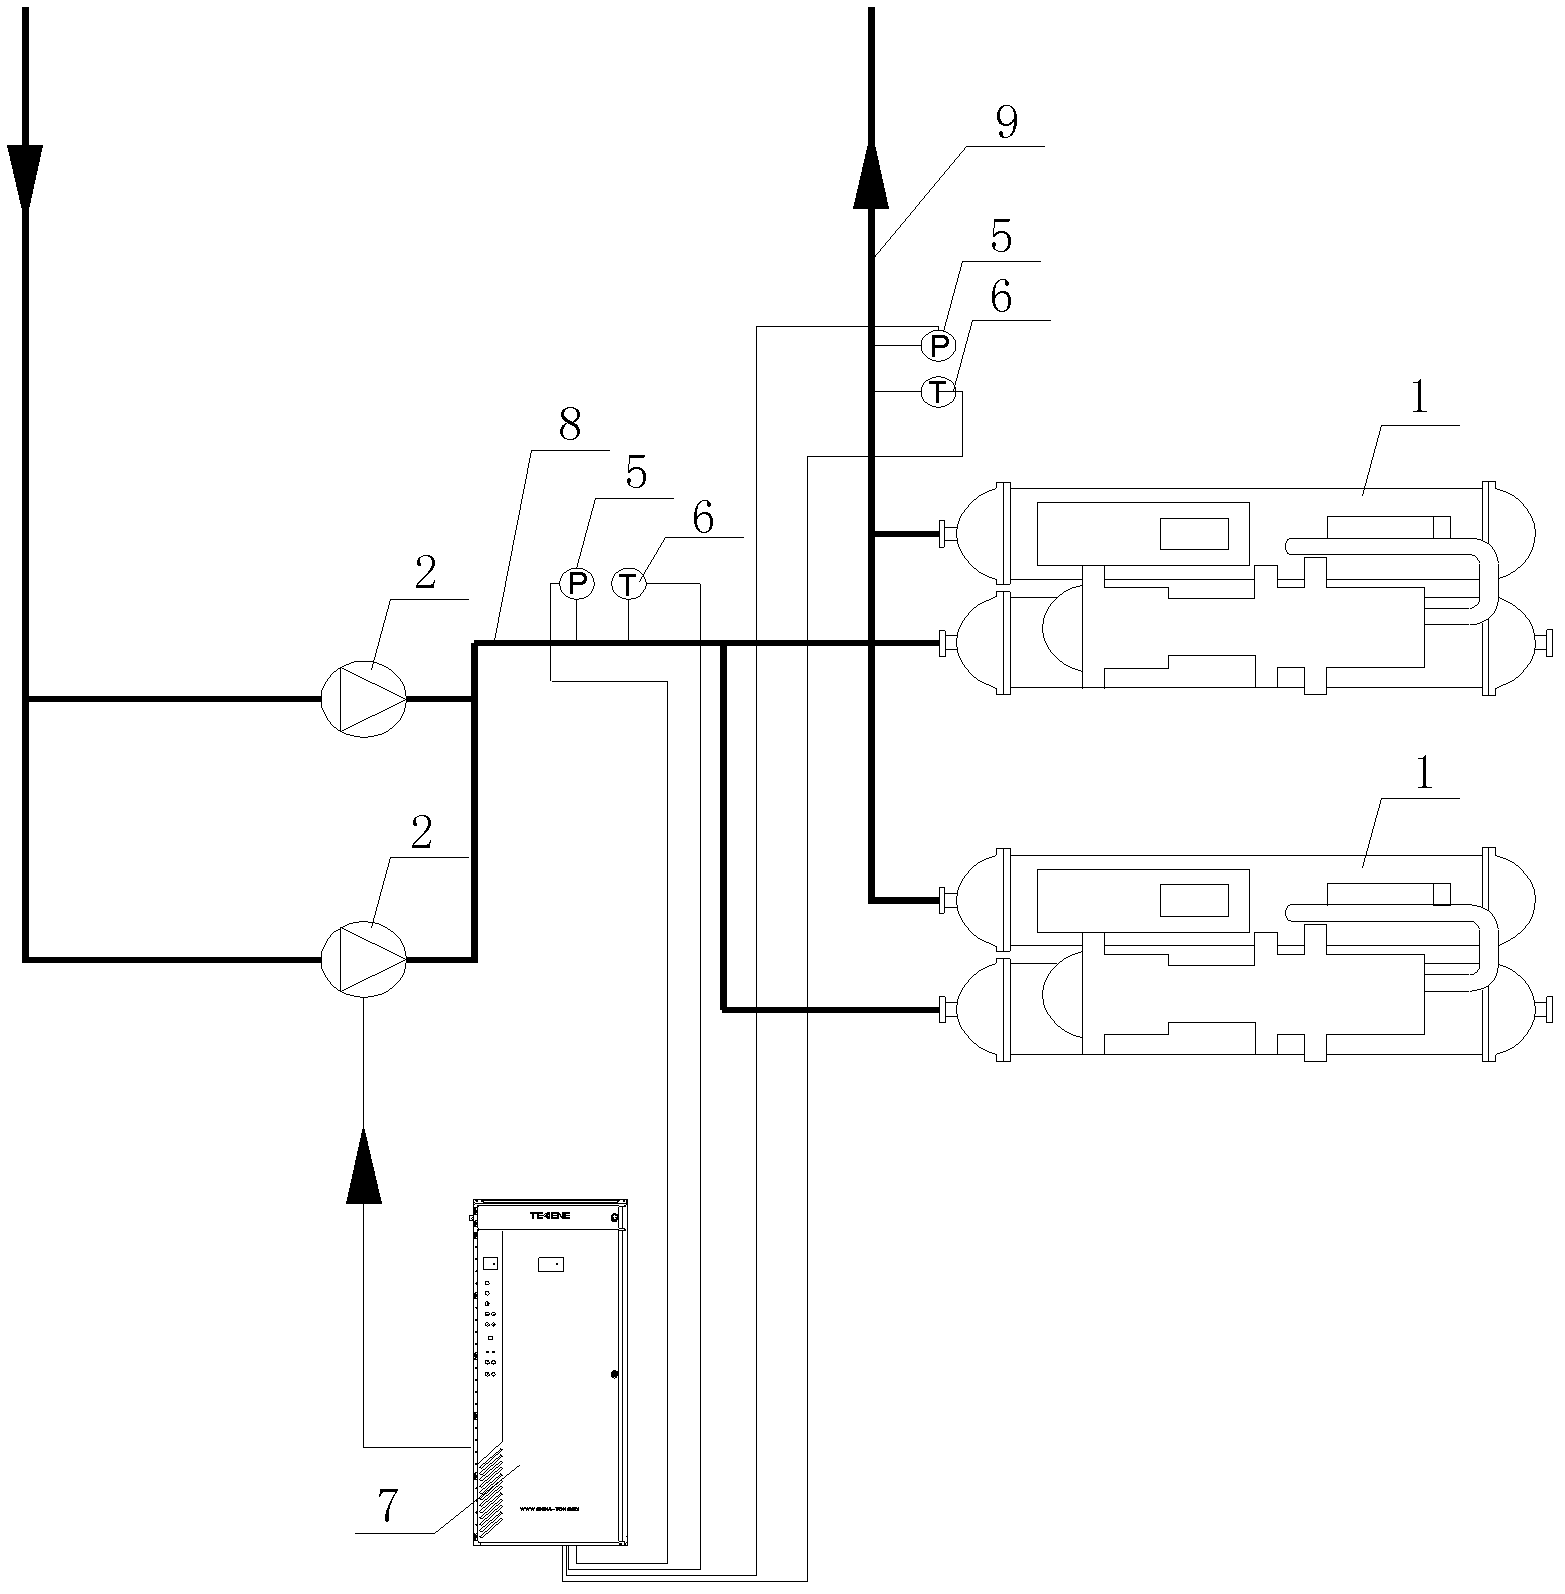 Matching system for pump head flow of central air-conditioning water system and resistance flow of air-conditioning pipeline system